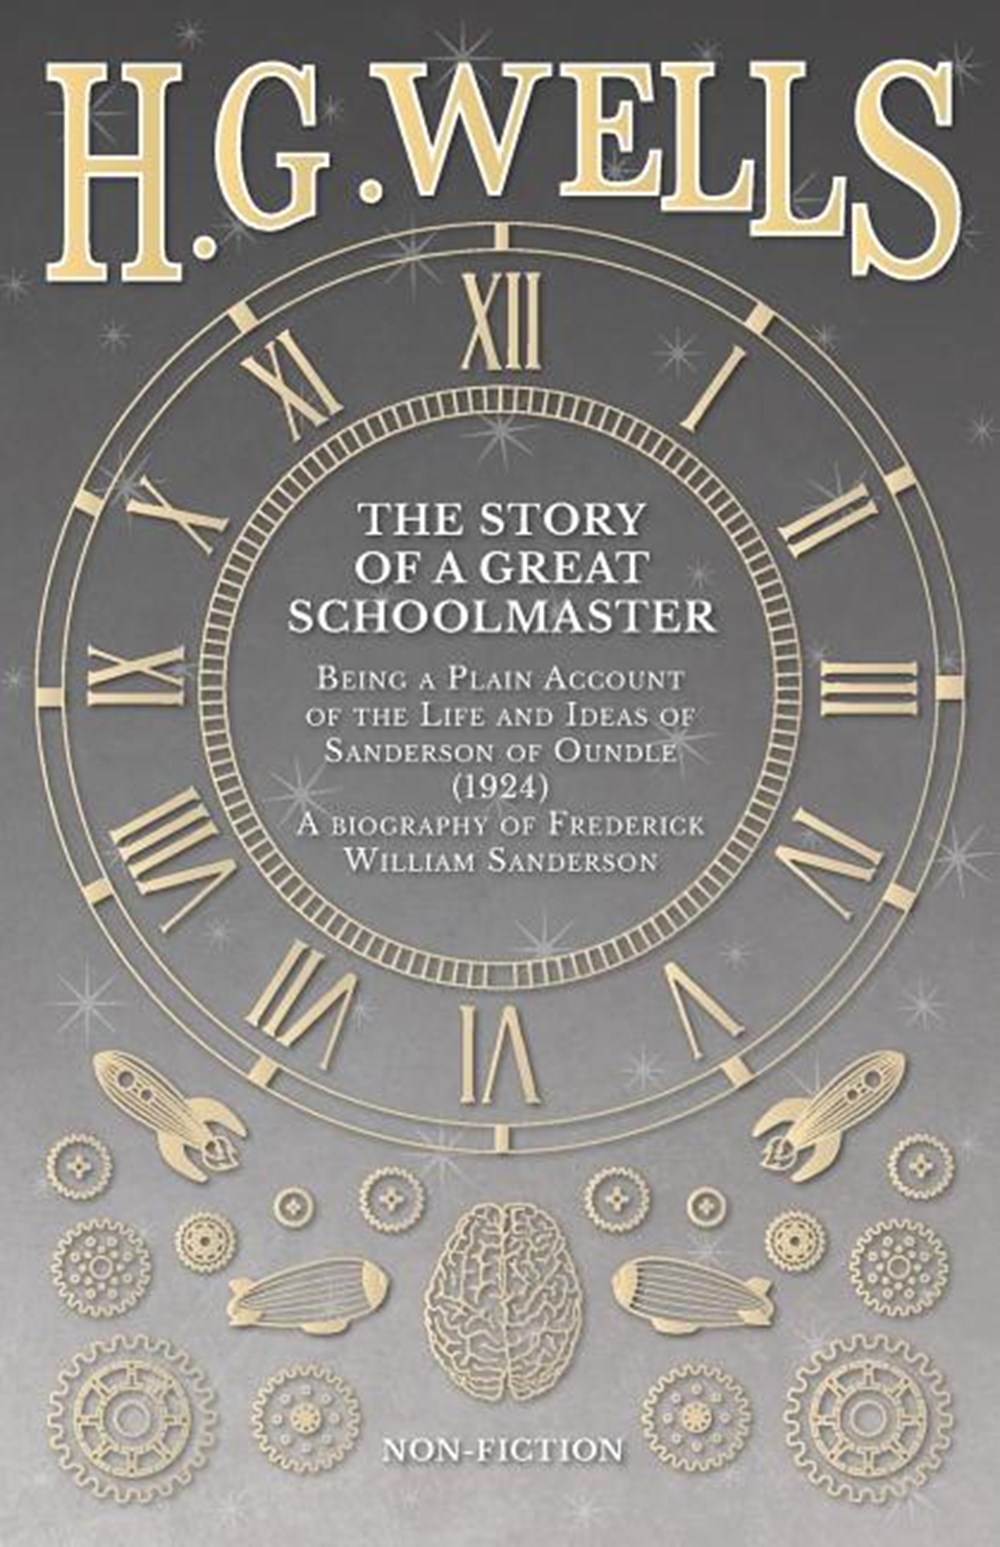 Story of a Great Schoolmaster: Being a Plain Account of the Life and Ideas of Sanderson of Oundle (1